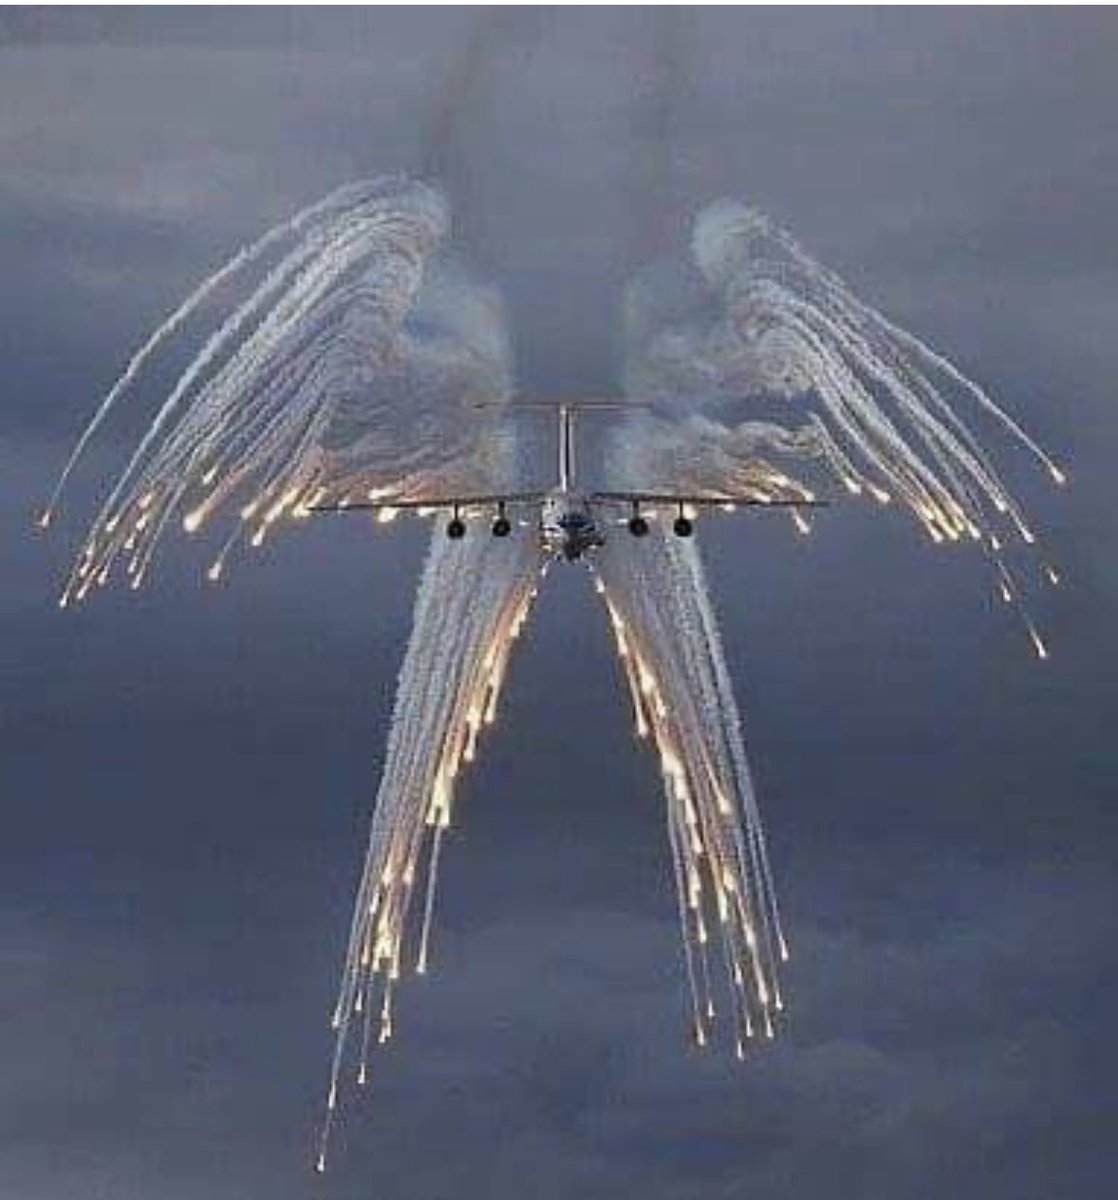 As Memorial Day draws to a close just a final Reminder. The C130s carrying fallen heroes have a call sign of Angel Flight. The flares are a final tribute! 🇺🇸🇺🇸🇺🇸🇺🇸🇺🇸🇺🇸🇺🇸🇺🇸🇺🇸🇺🇸🇺🇸